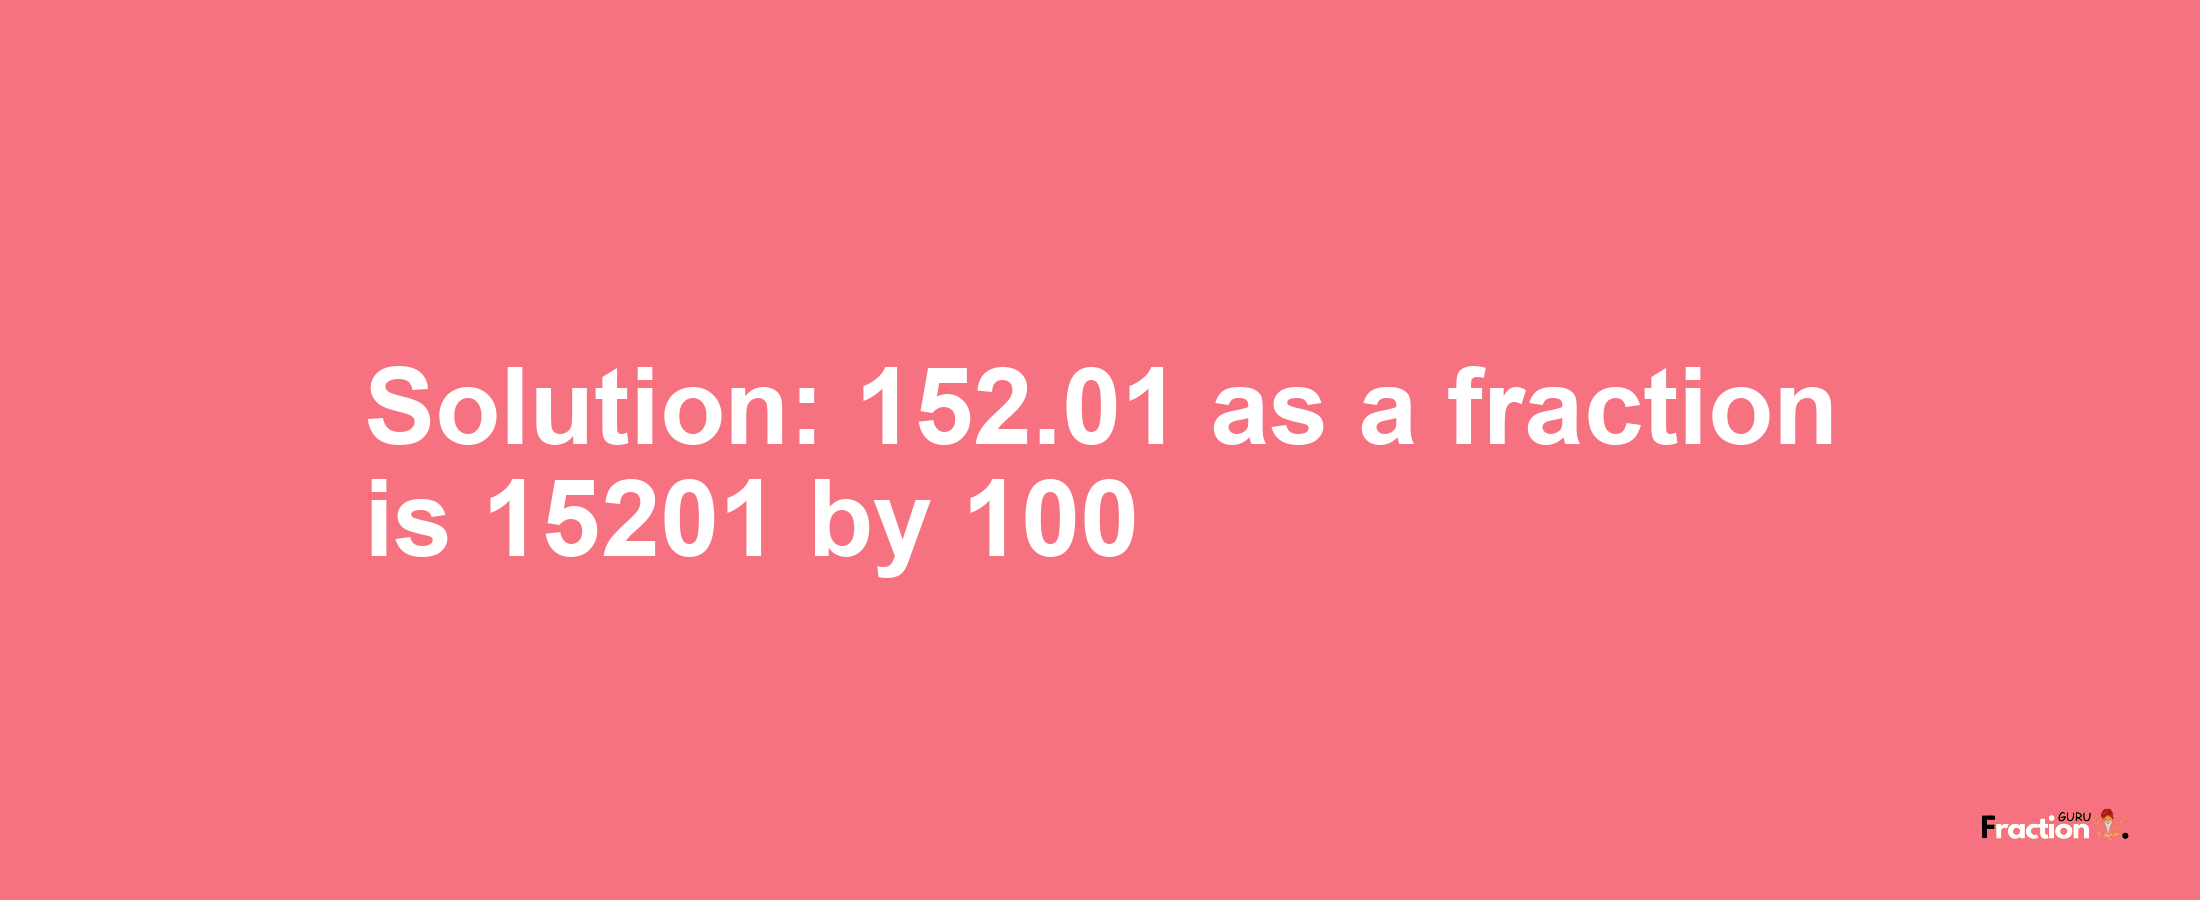 Solution:152.01 as a fraction is 15201/100